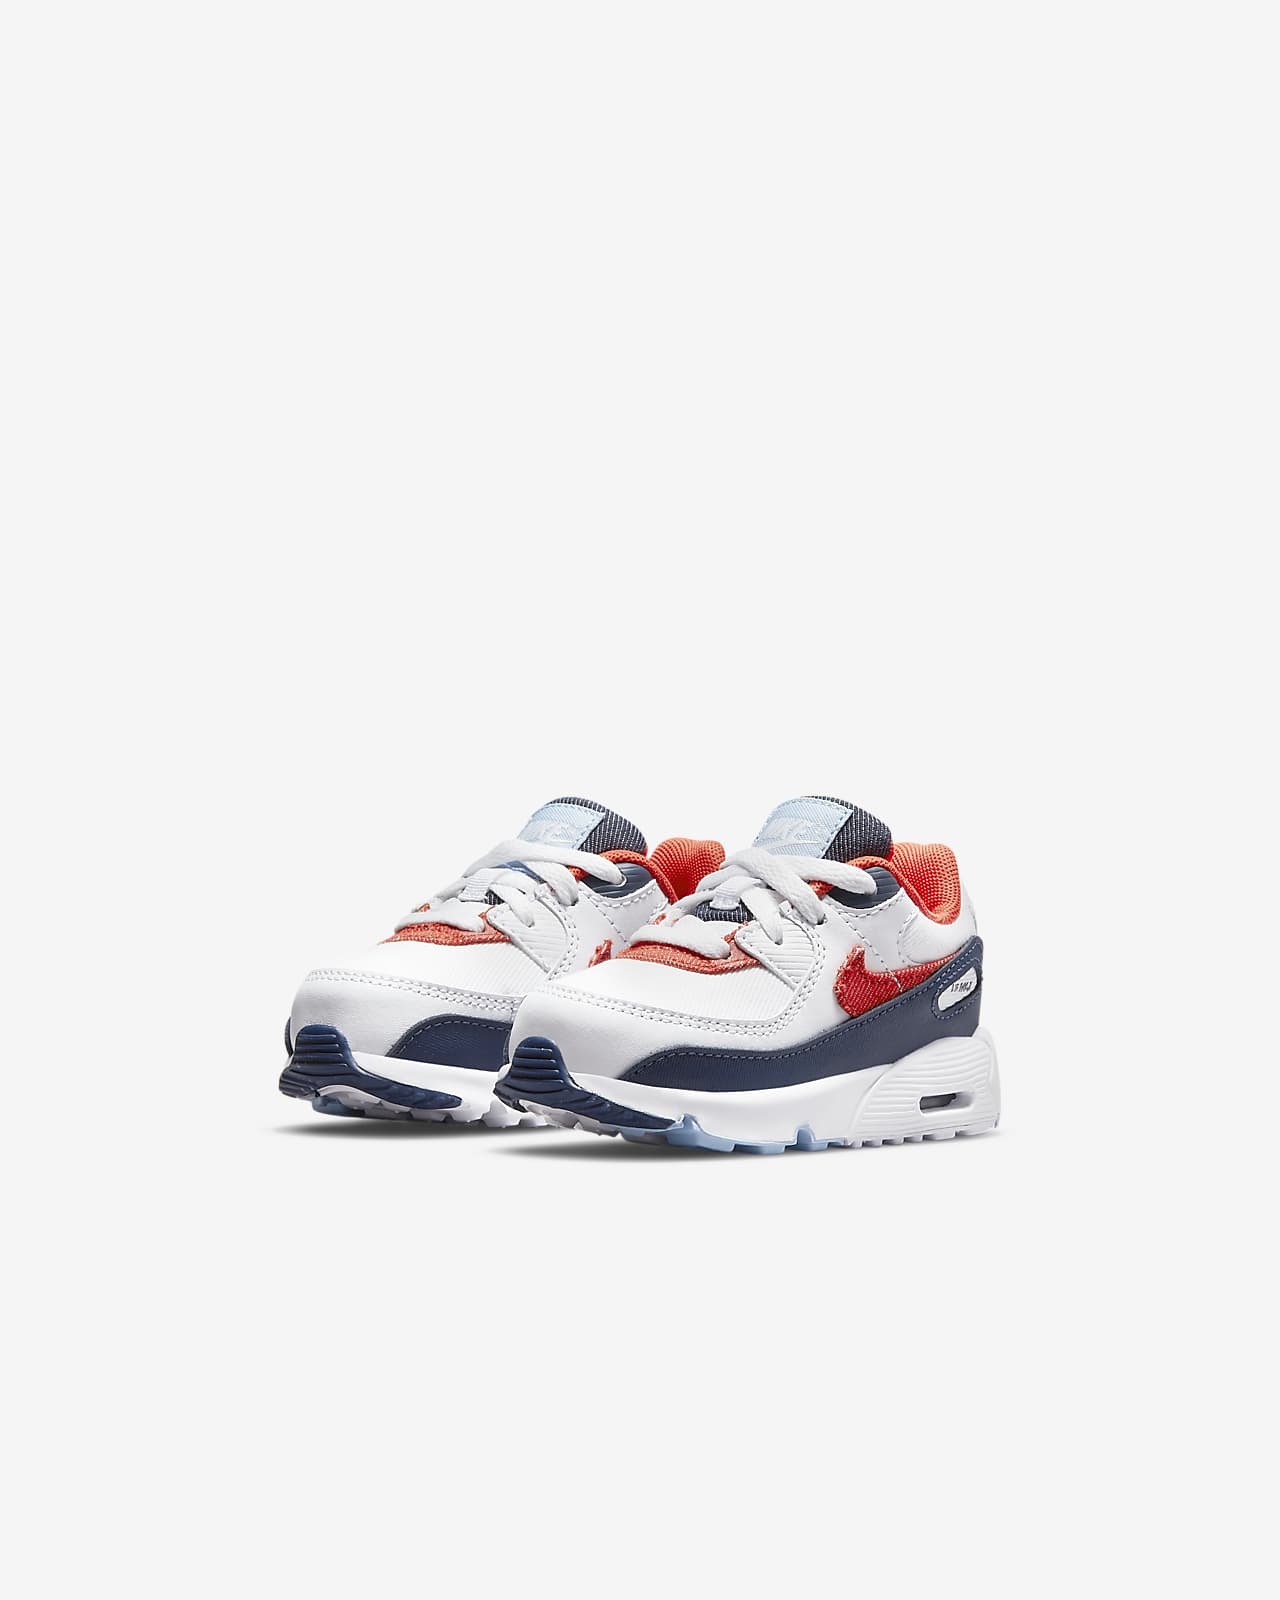 Nike Air Max 90 Baby/Toddler Shoes 